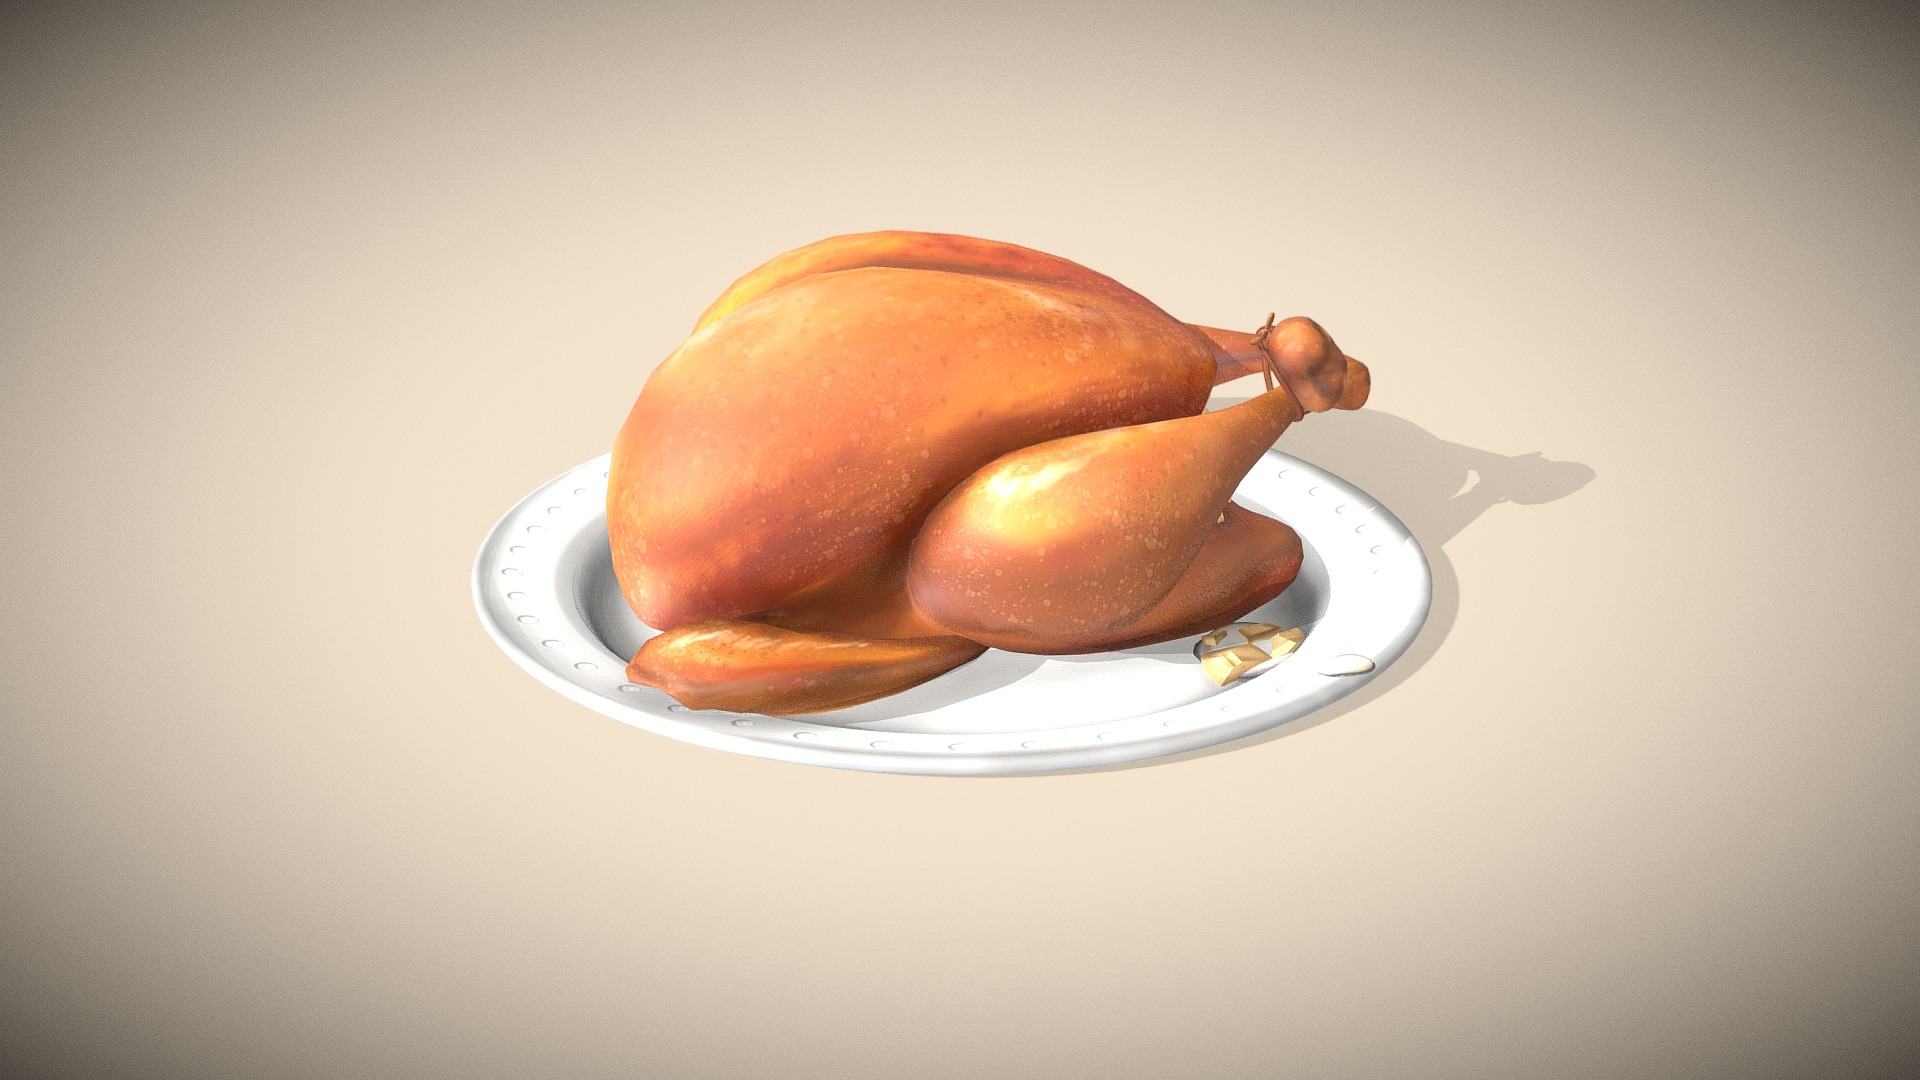 3D model Turkey - This is a 3D model of the Turkey. The 3D model is about a round orange object on a white plate.